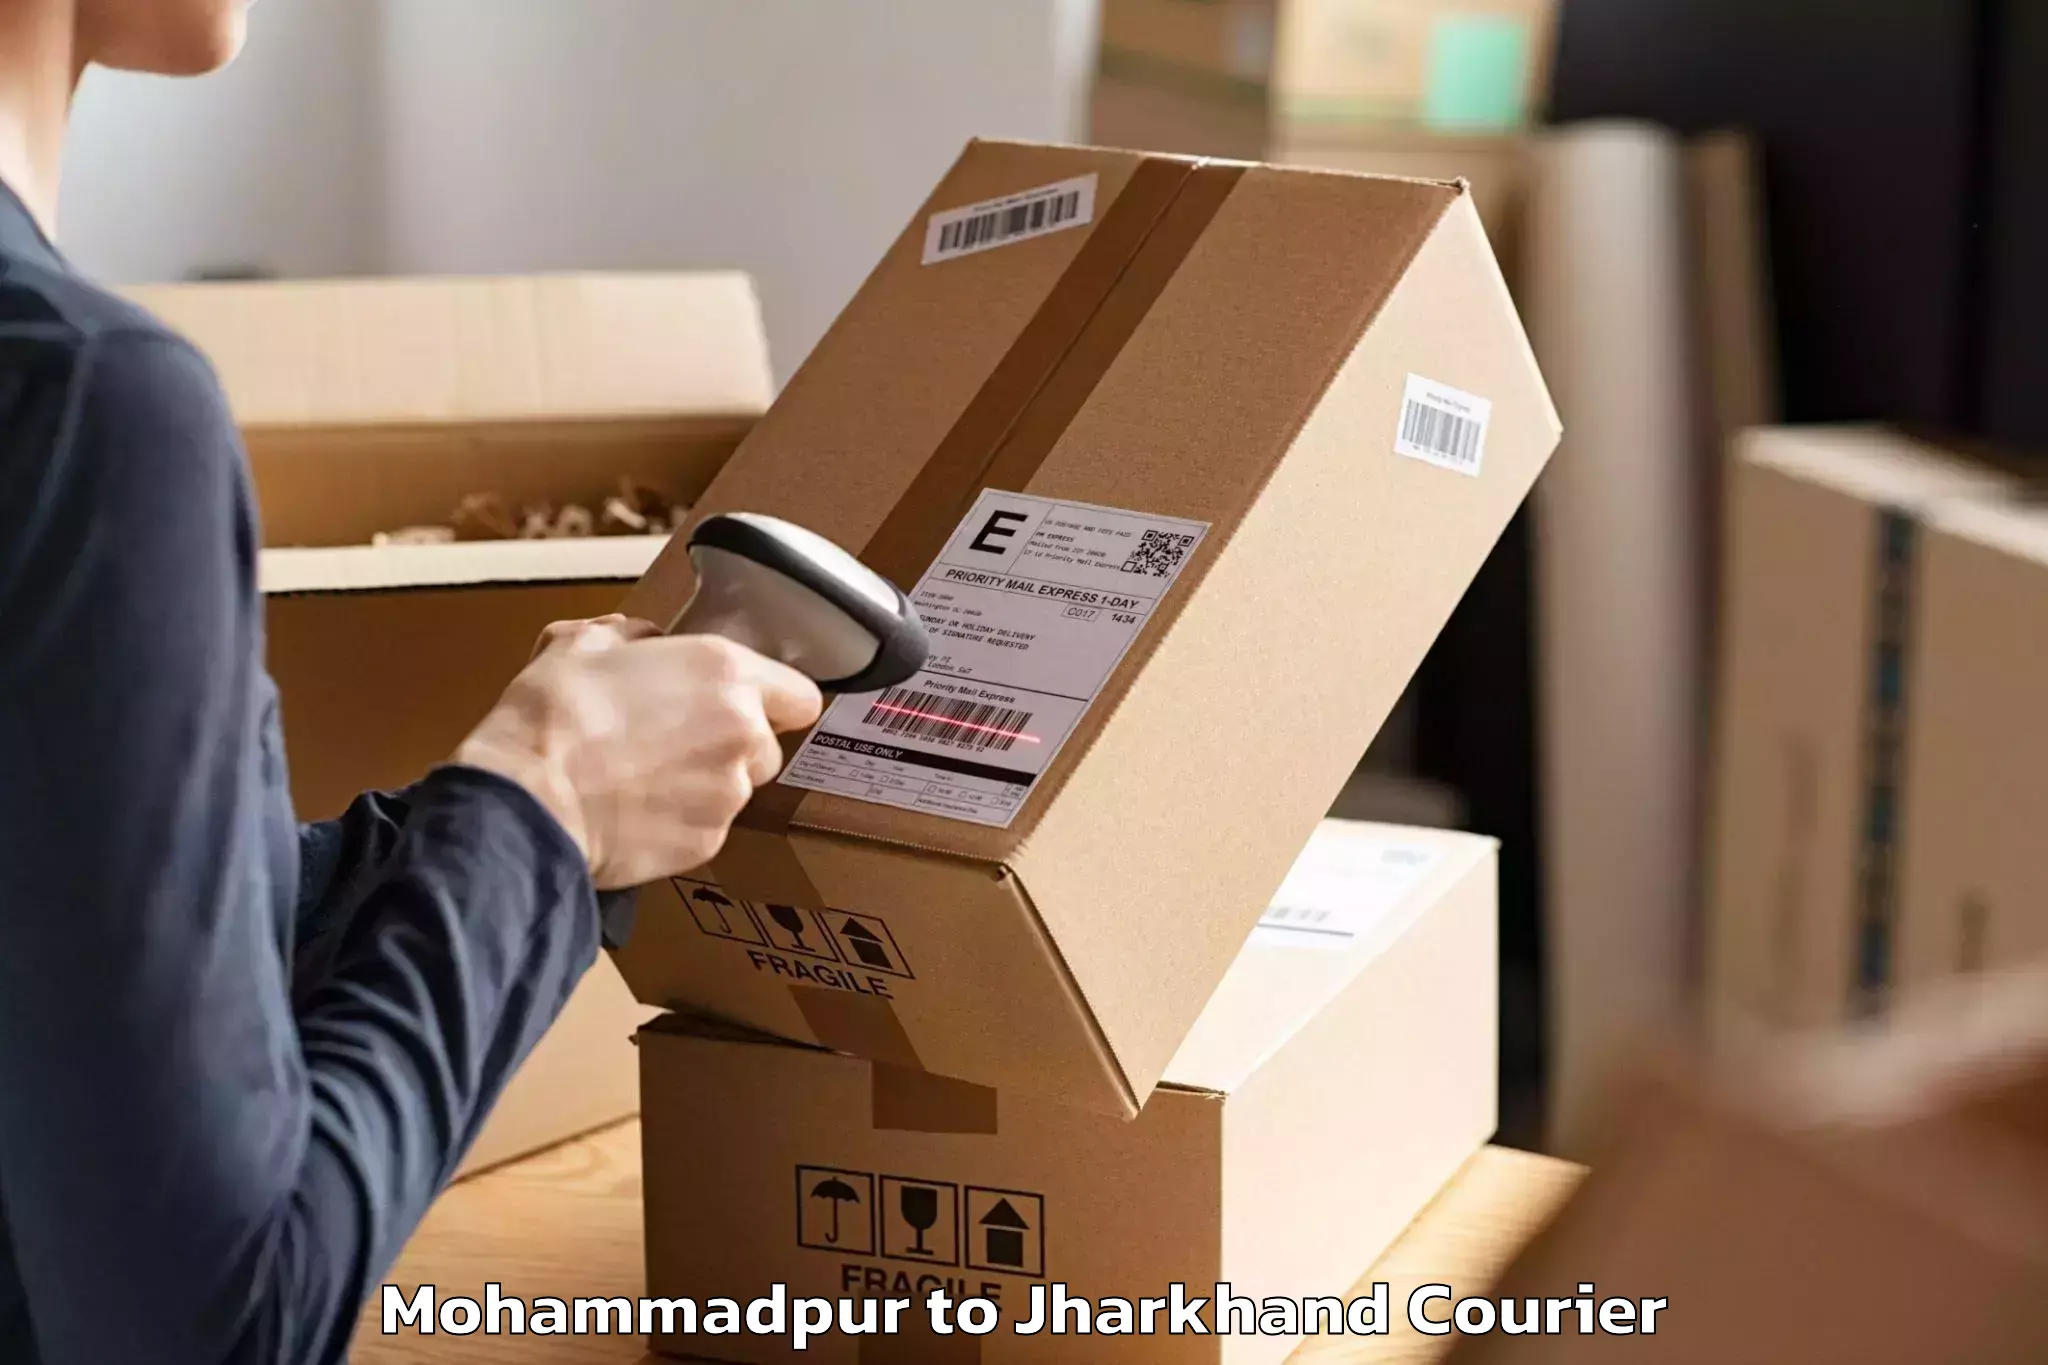 Moving and handling services in Mohammadpur to Rajmahal